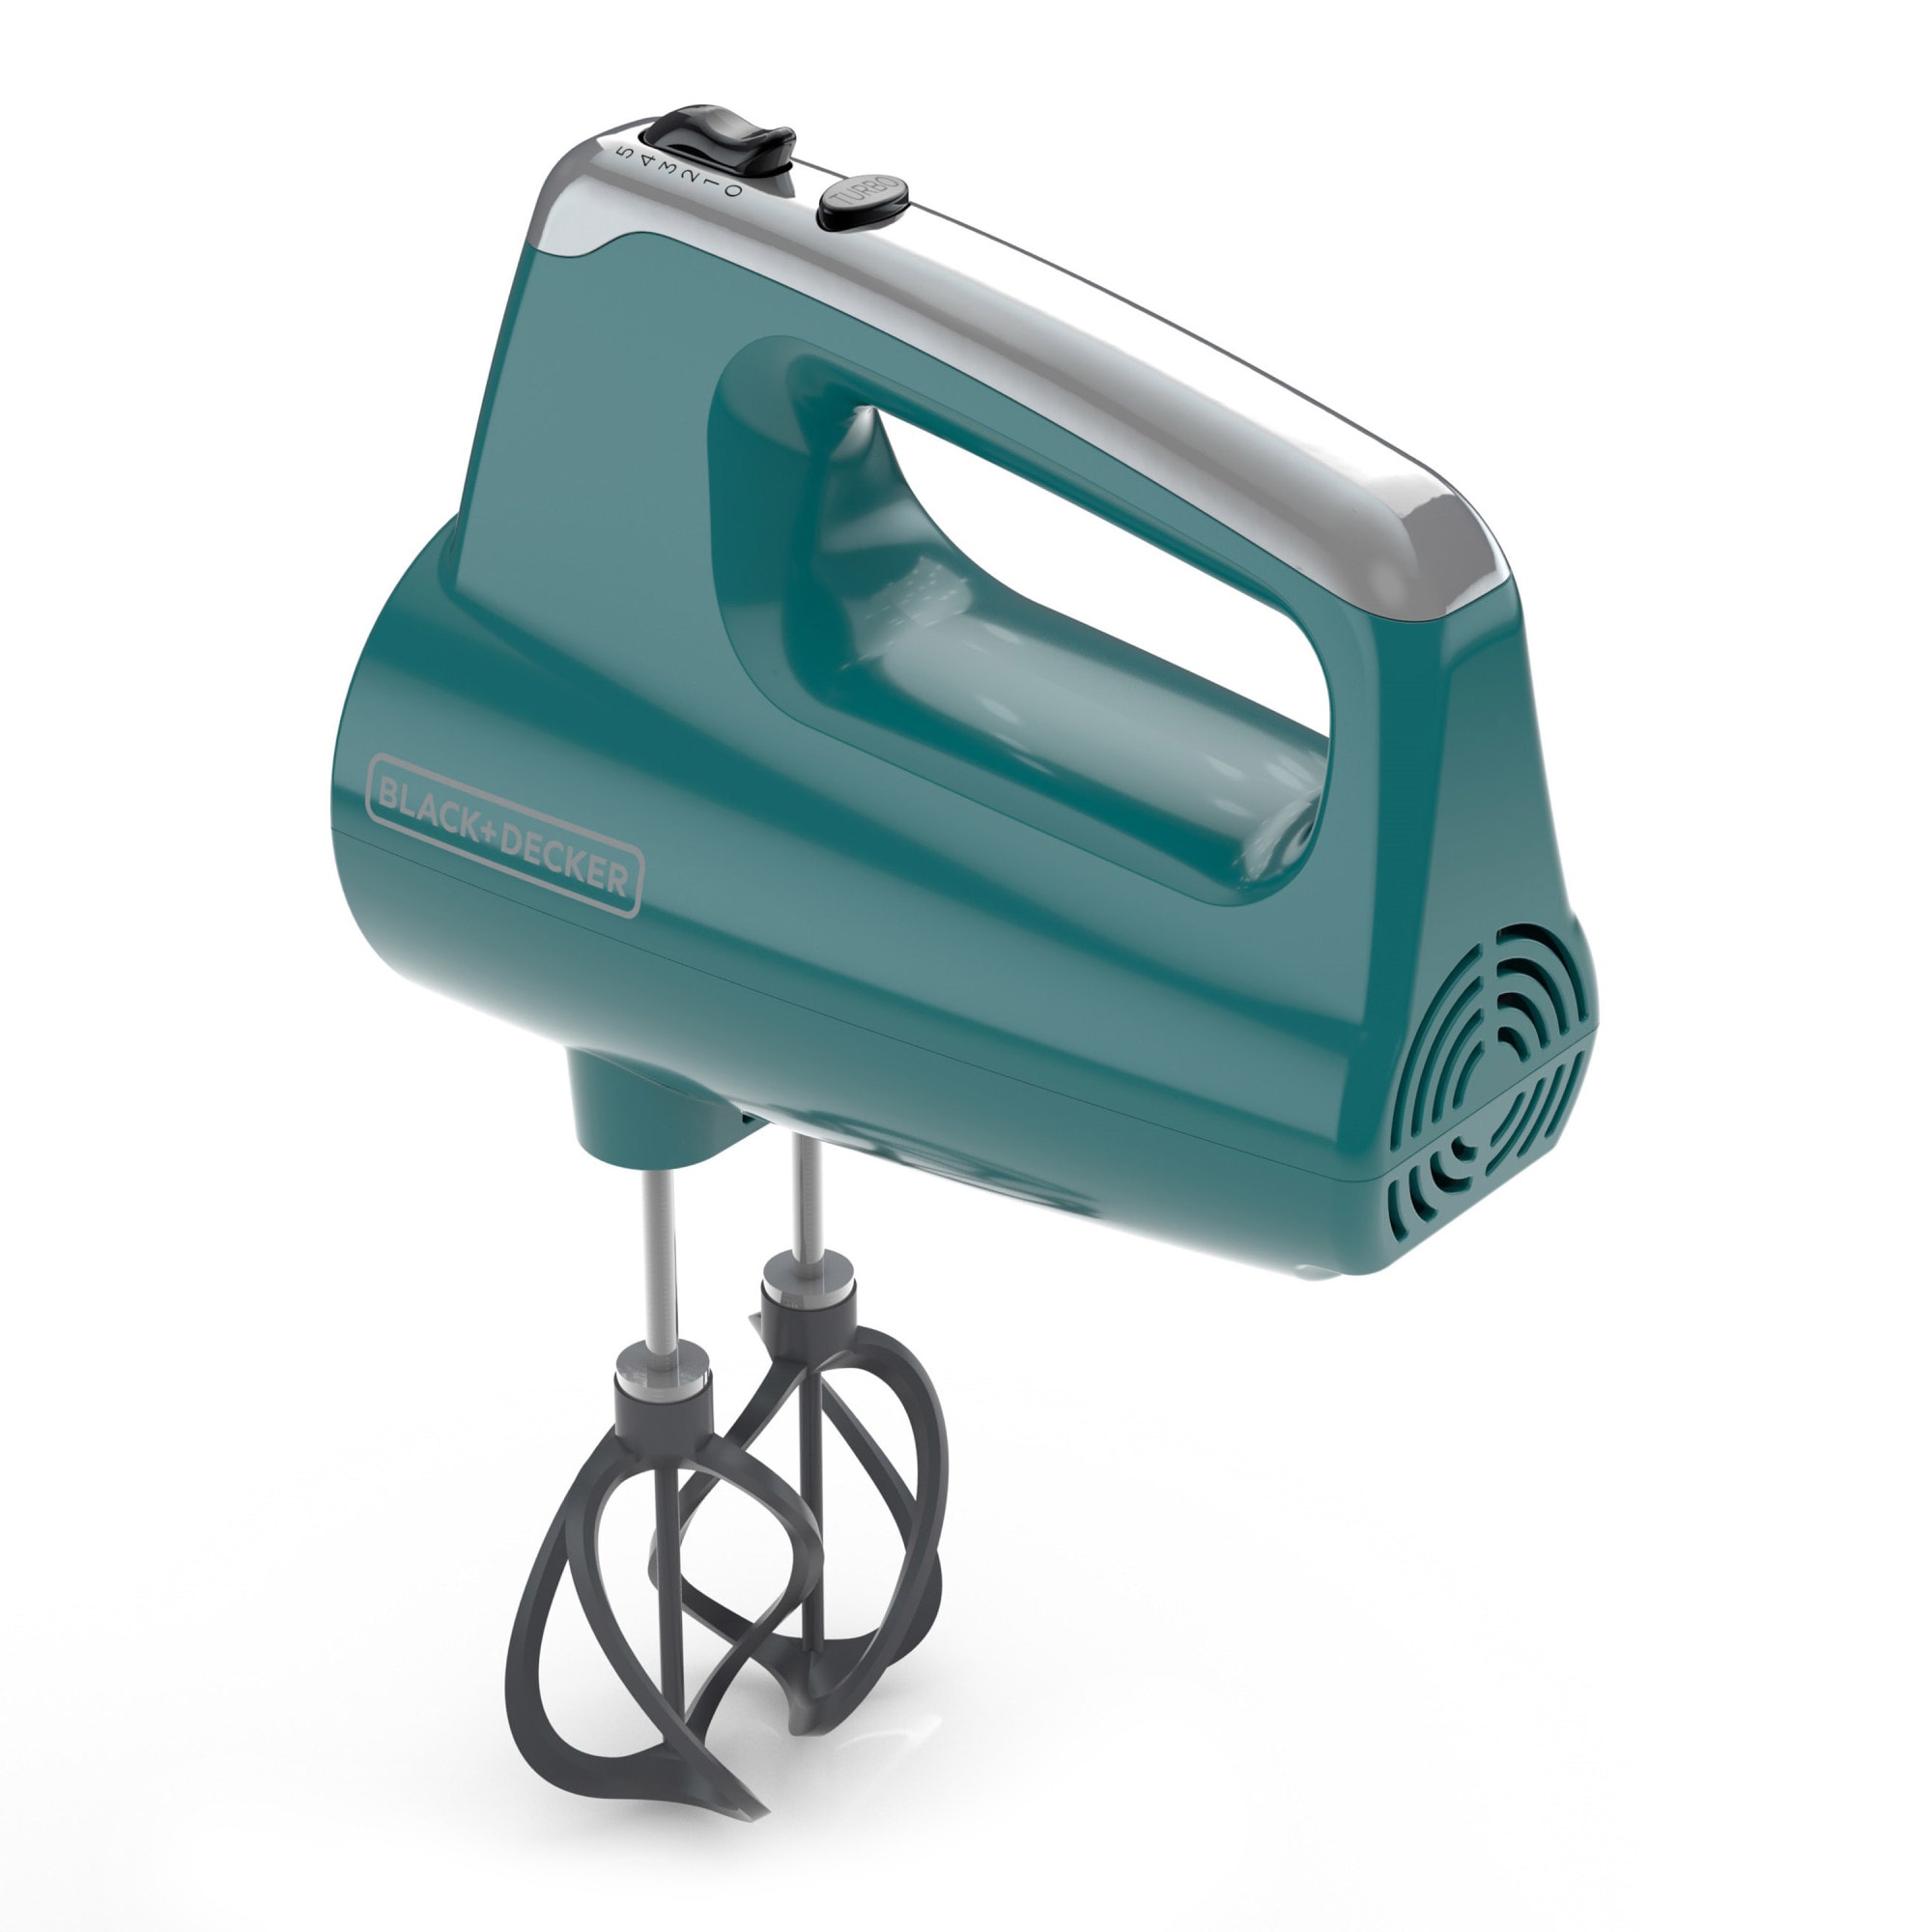 BLACK+DECKER Helix Performance Mixer 60-in Cord 5-Speed Teal Hand Mixer at